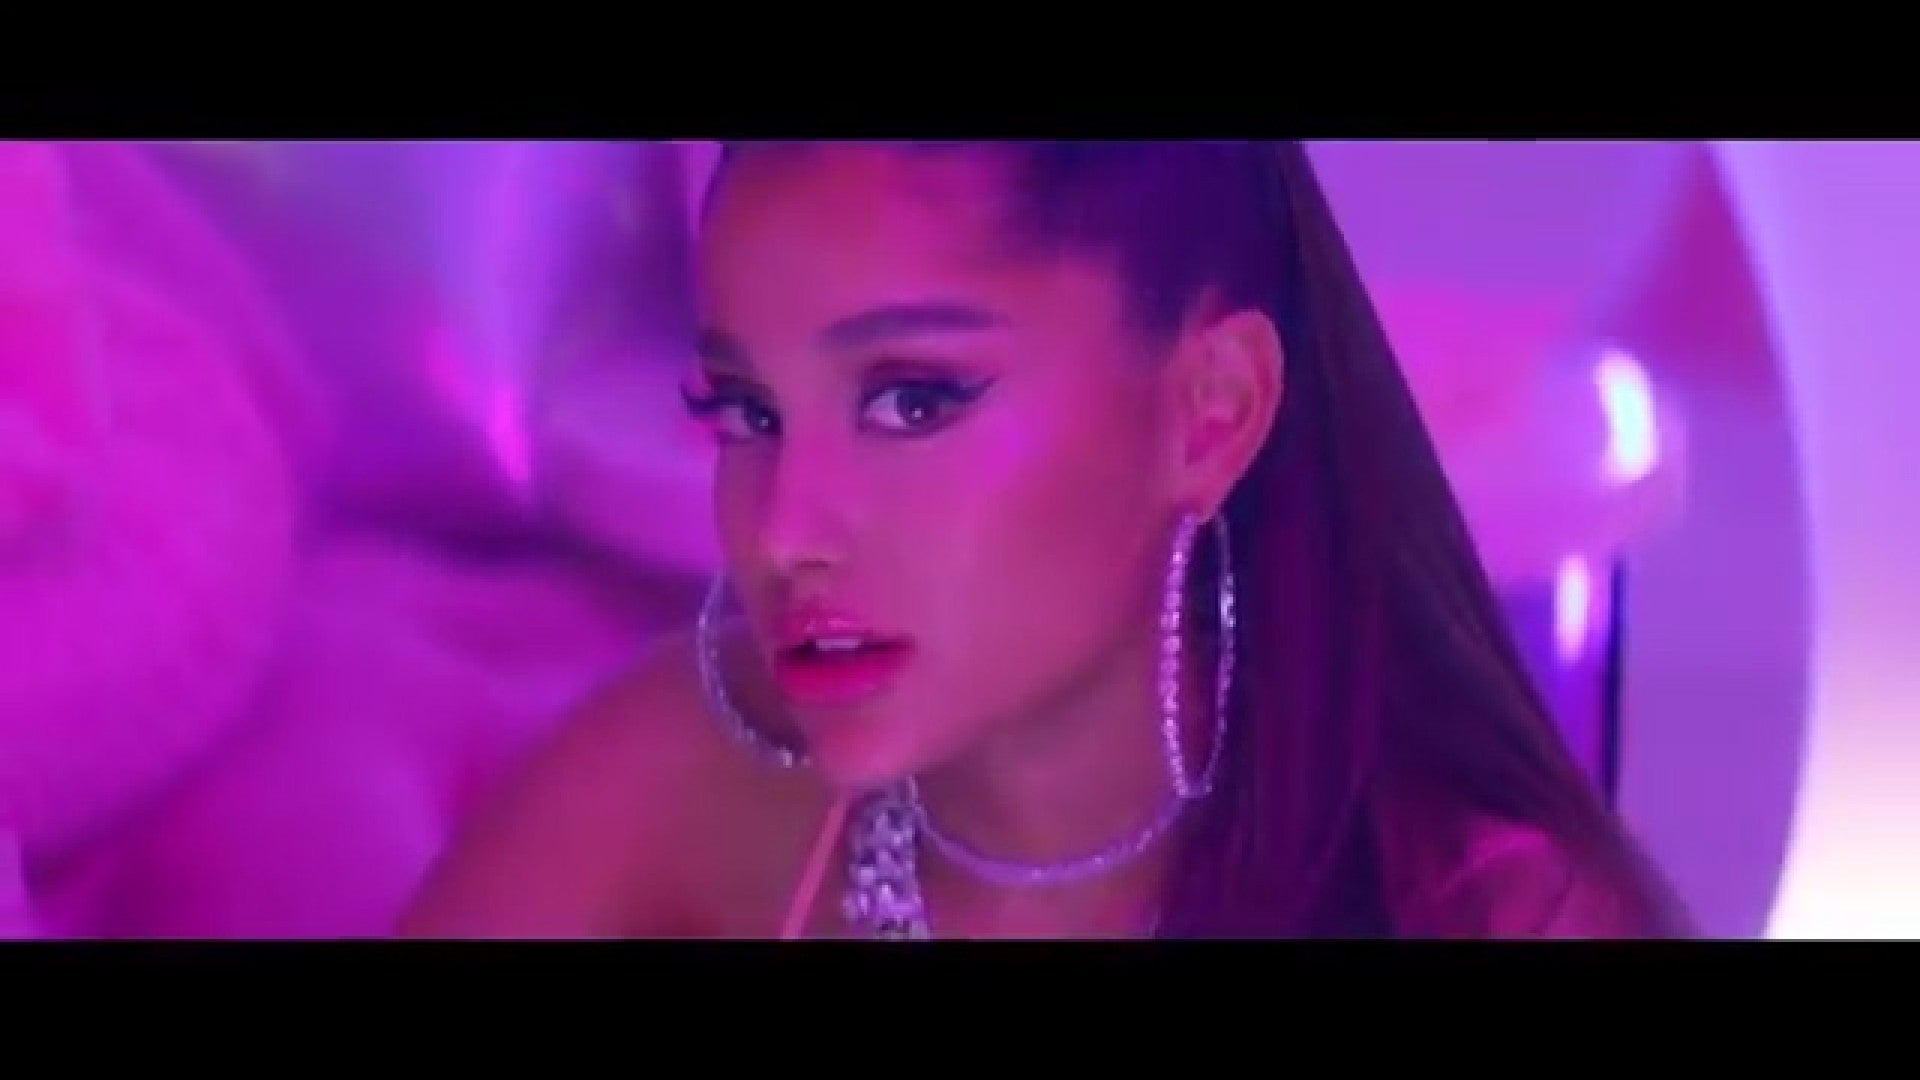 Ariana Grande Pornhub - Ariana Grande's '7 Rings': Details You Might Have Missed